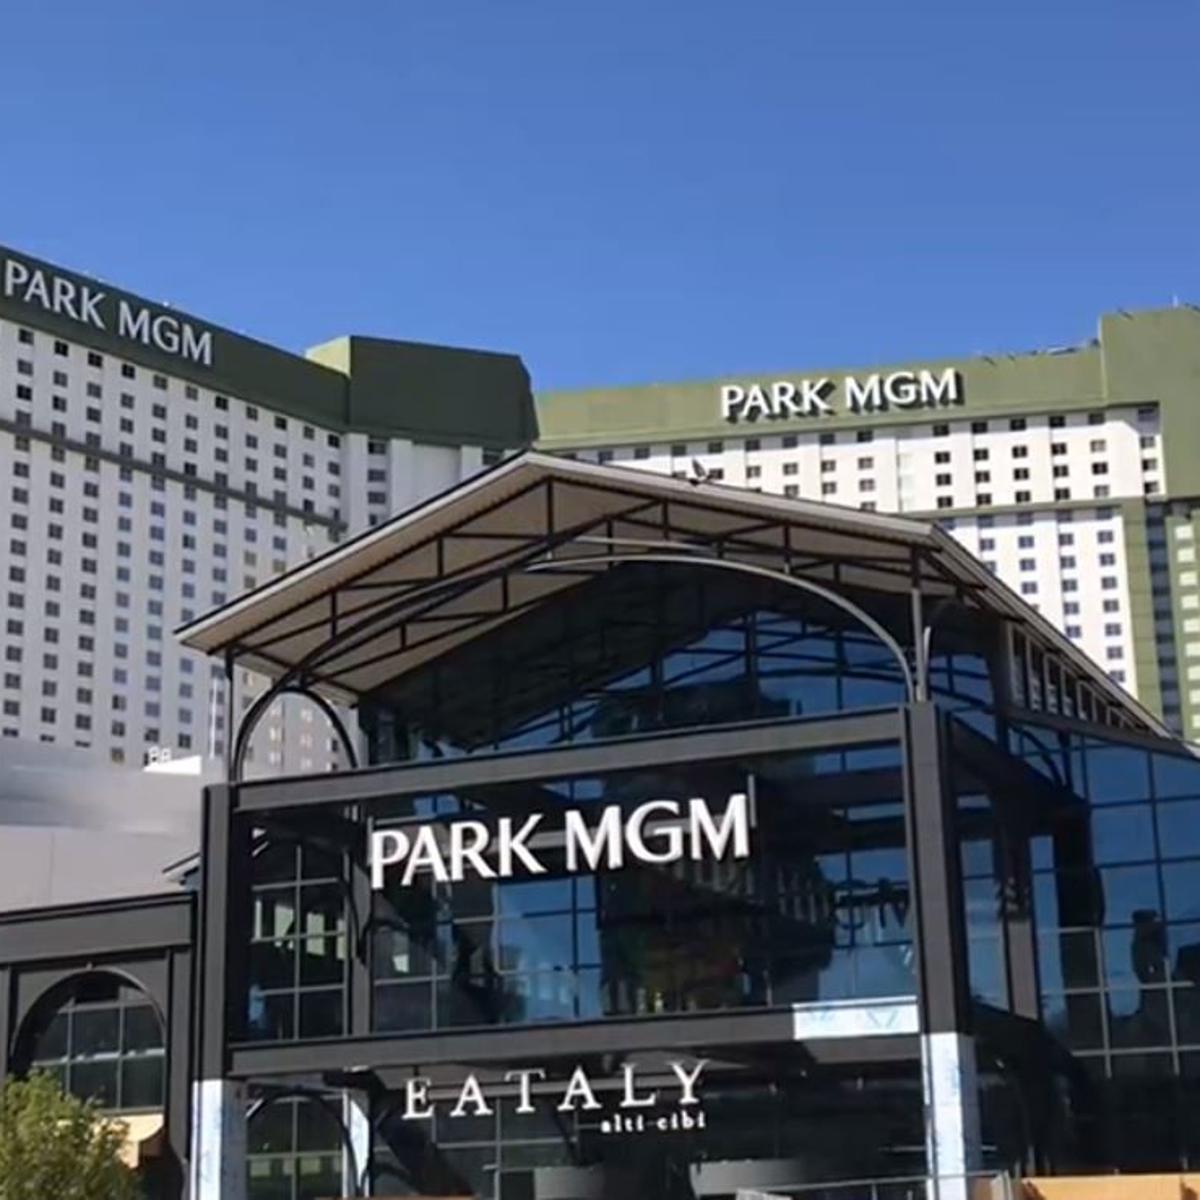 cost to park at mgm casino